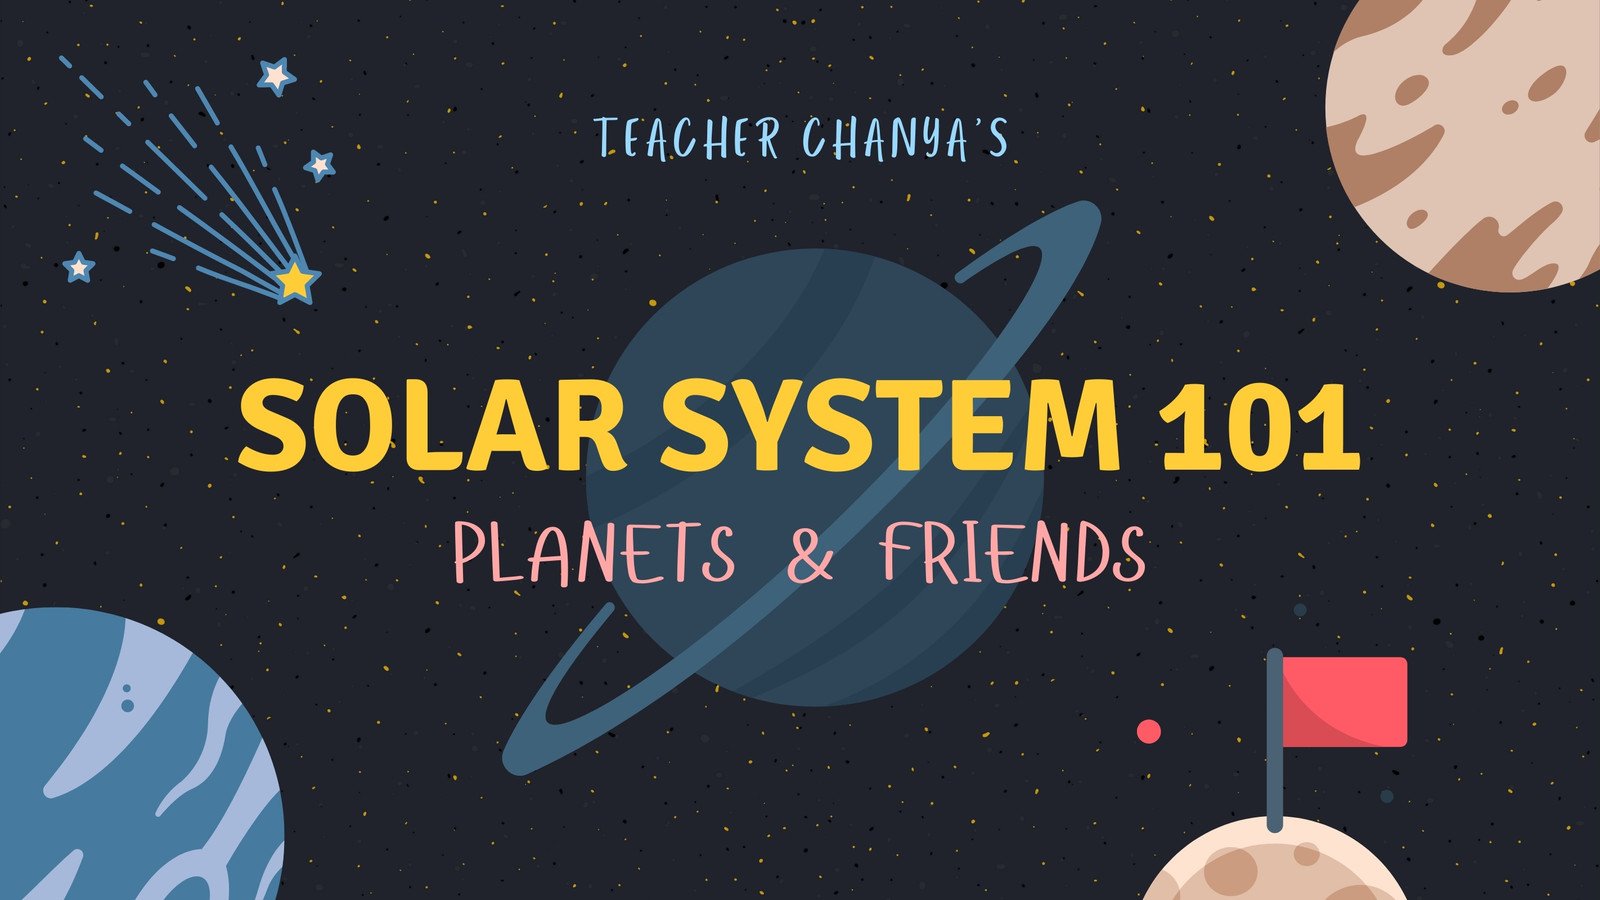 Free and customizable science presentation templates | Canva